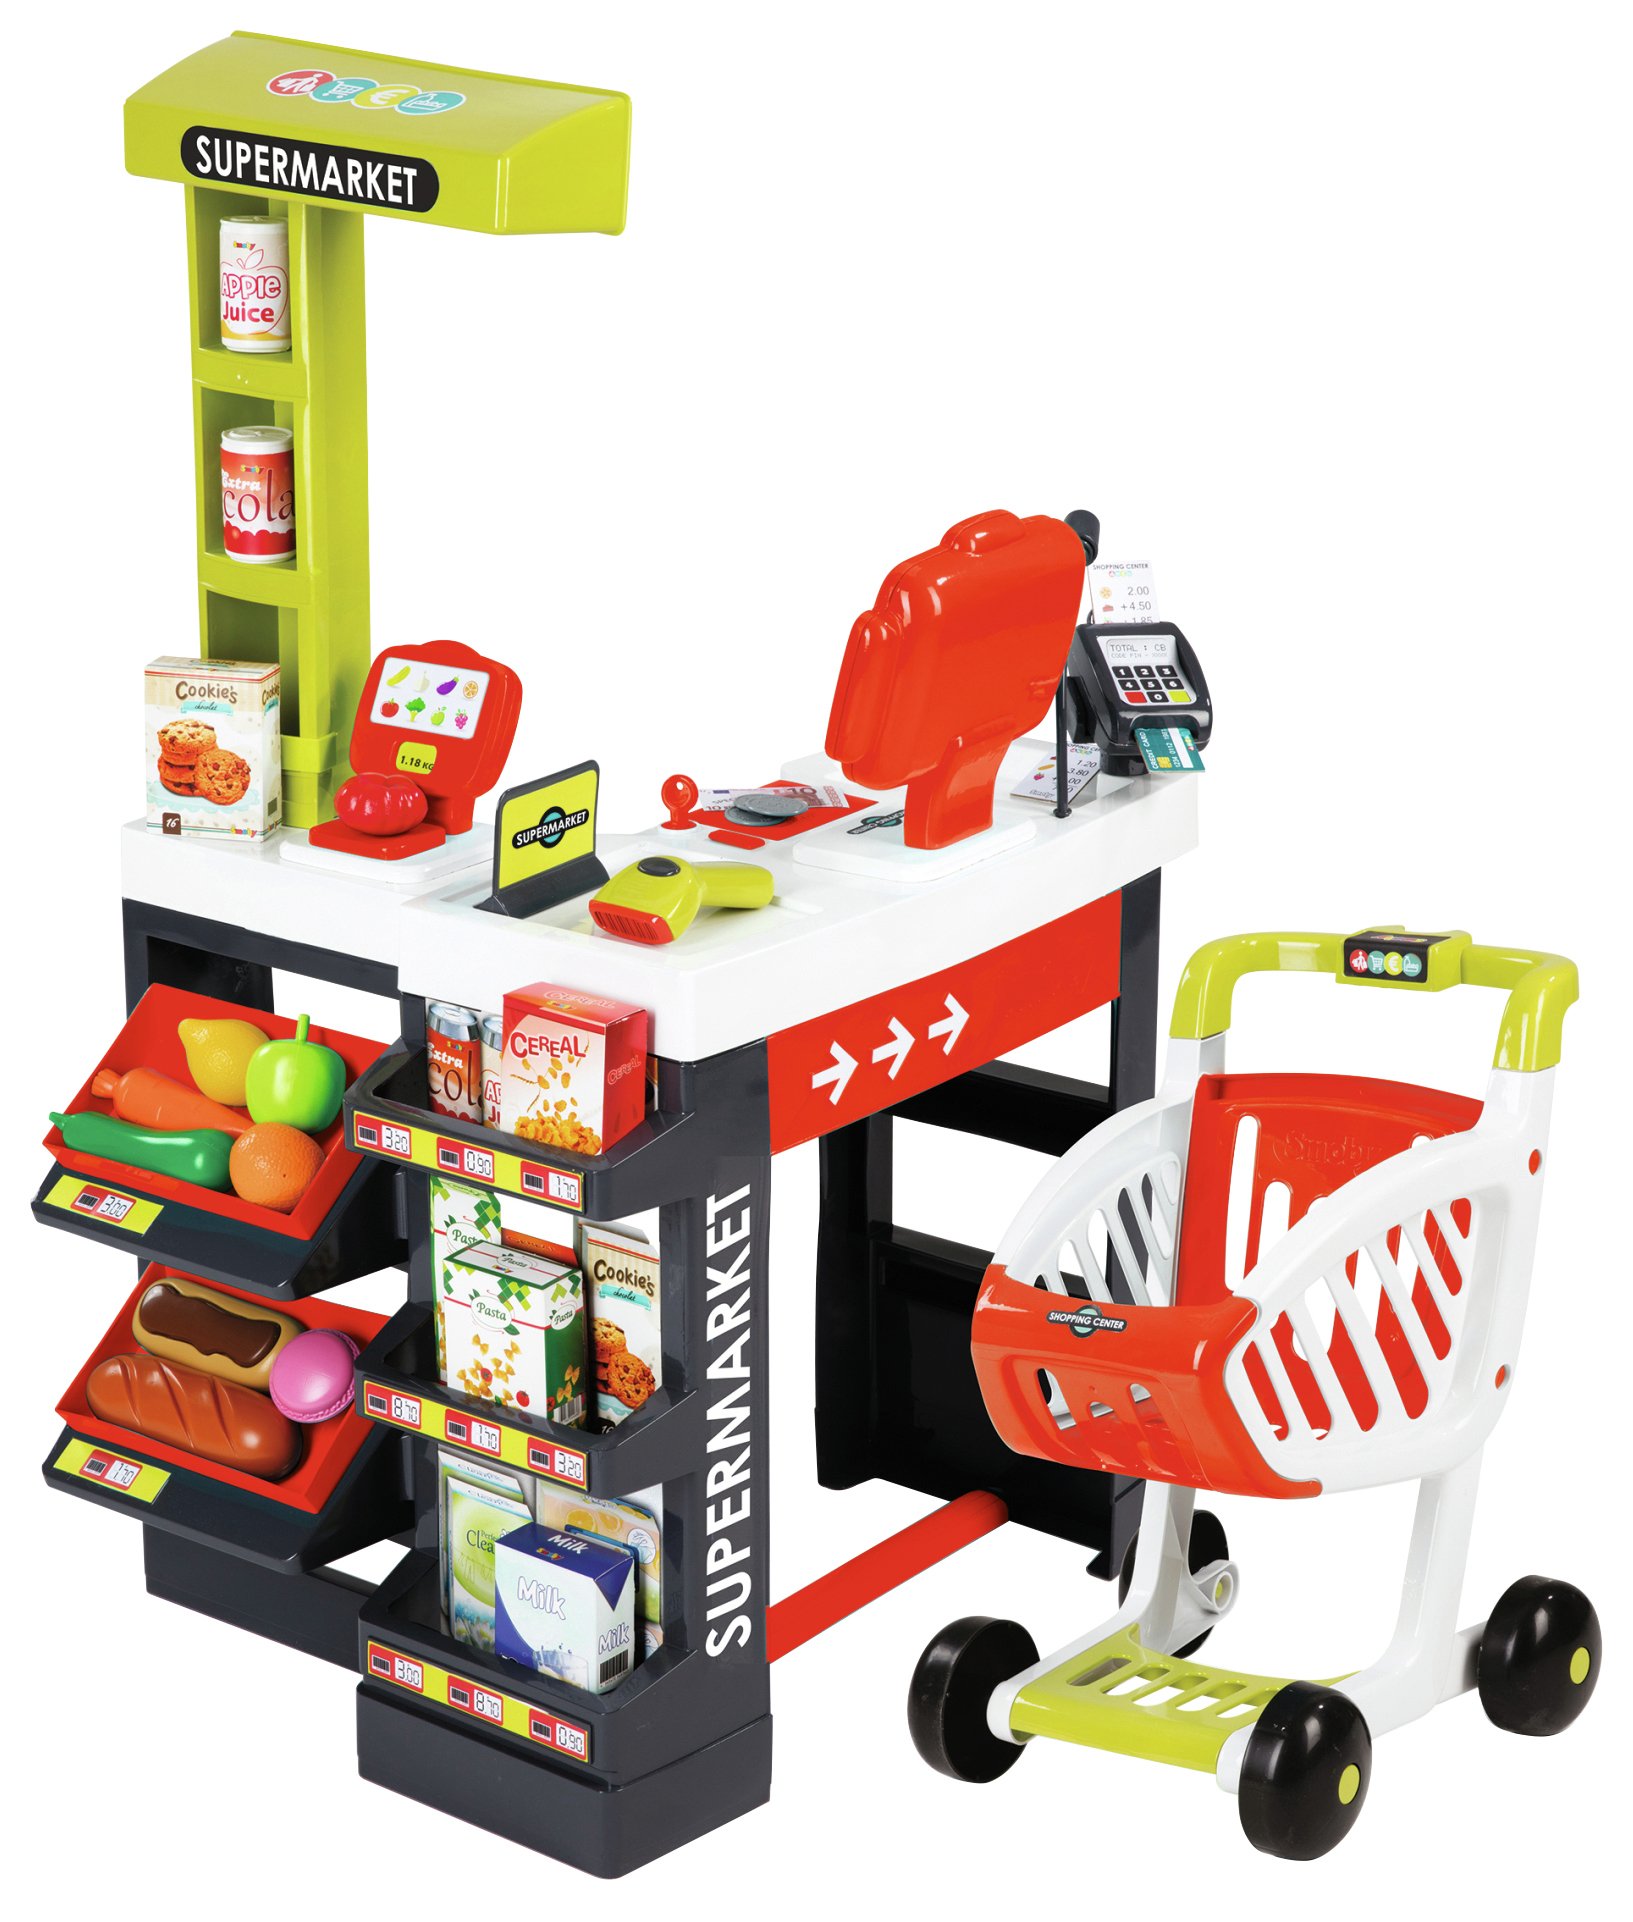 Smoby Supermarket Playset - Red